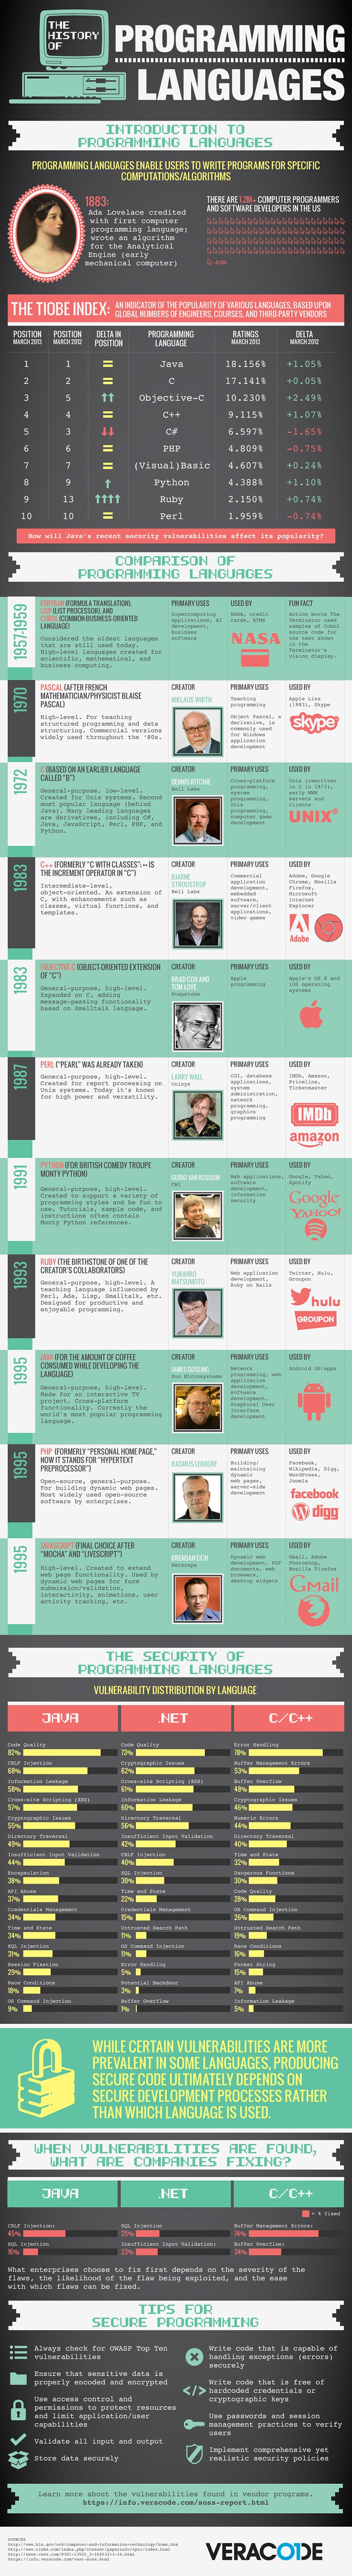 history-of-programming-languages-infographic